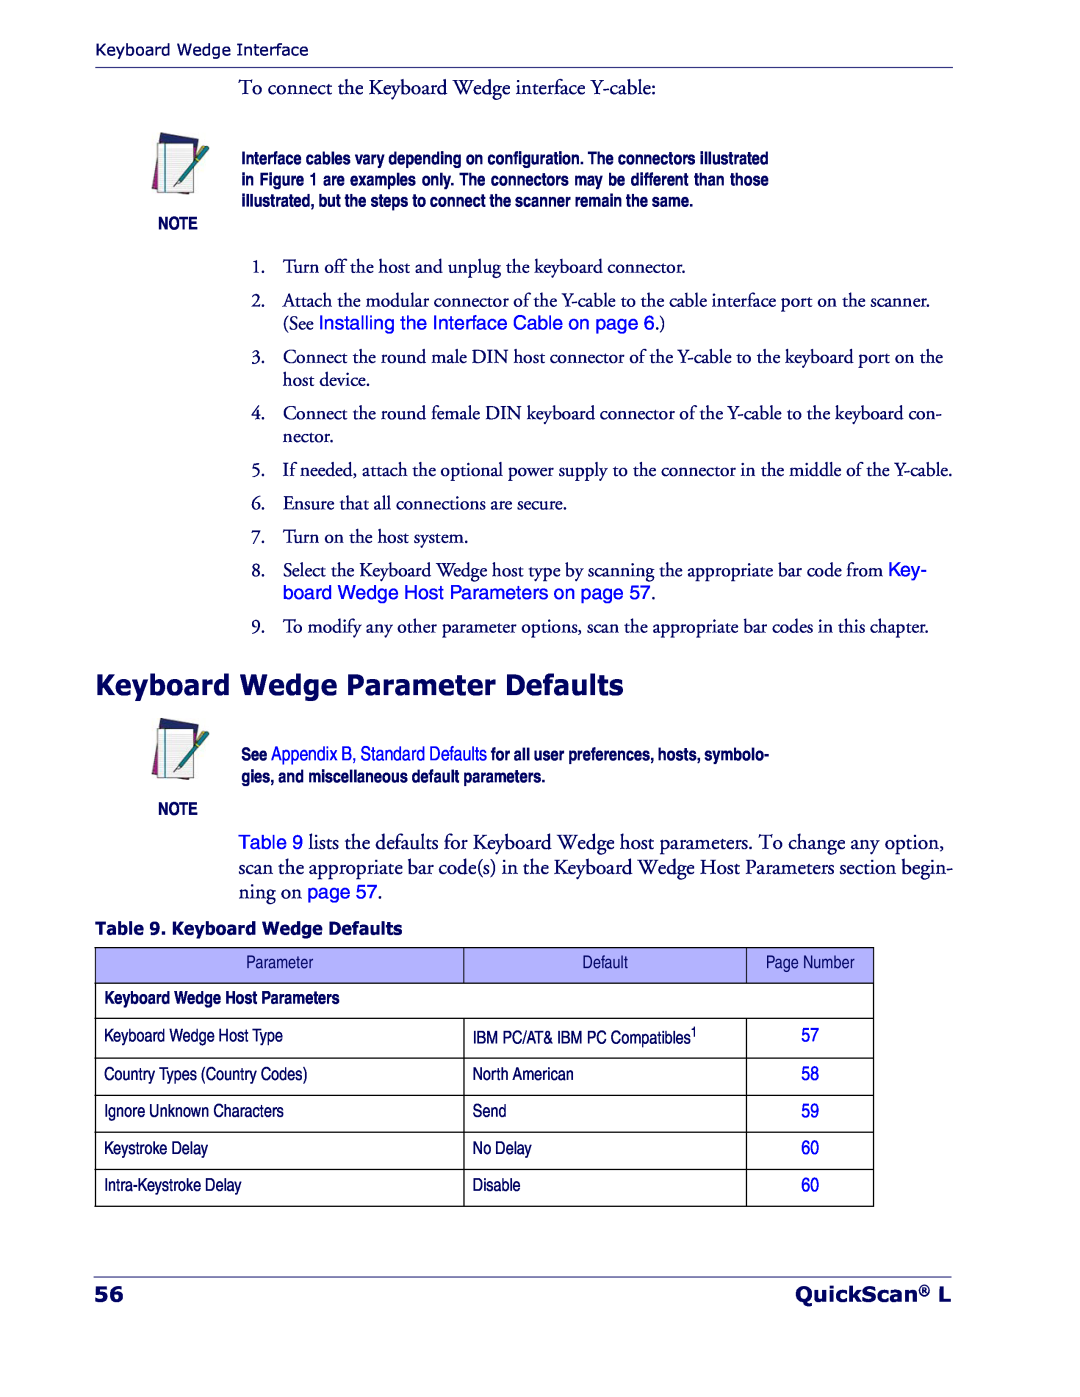 Datalogic Scanning QD 2300 Keyboard Wedge Parameter Defaults, To connect the Keyboard Wedge interface Y-cable, QuickScan L 